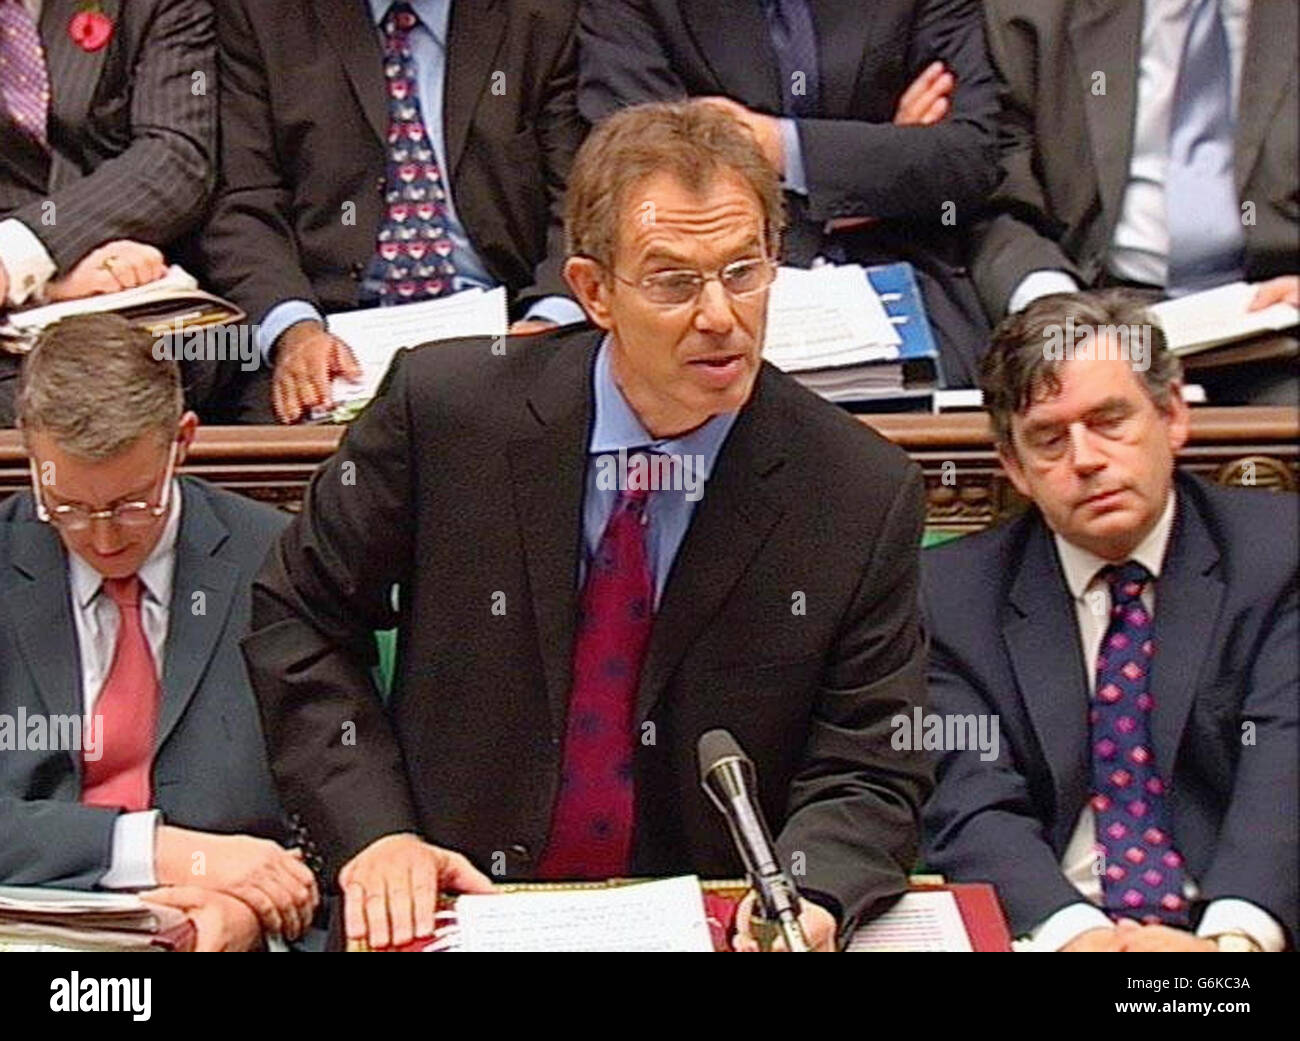 Video grab of Prime Minister Tony Blair speaking during Prime Minister's Questions at the House of Commons, London. Stock Photo